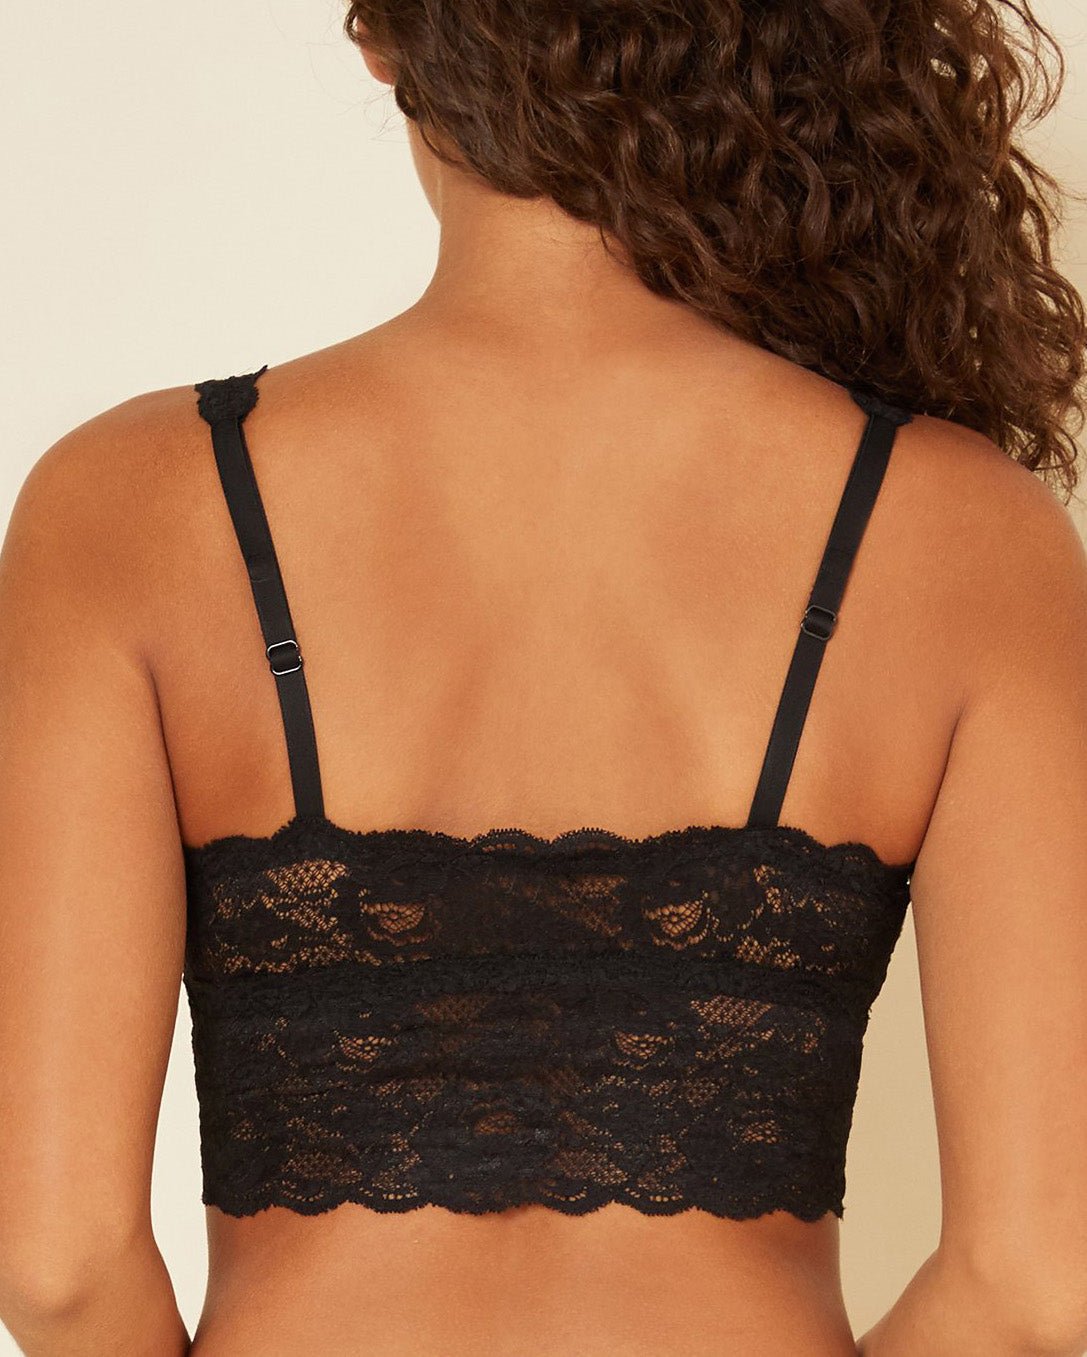 Cosabella, Never Say Never Extended Plungie Bralette